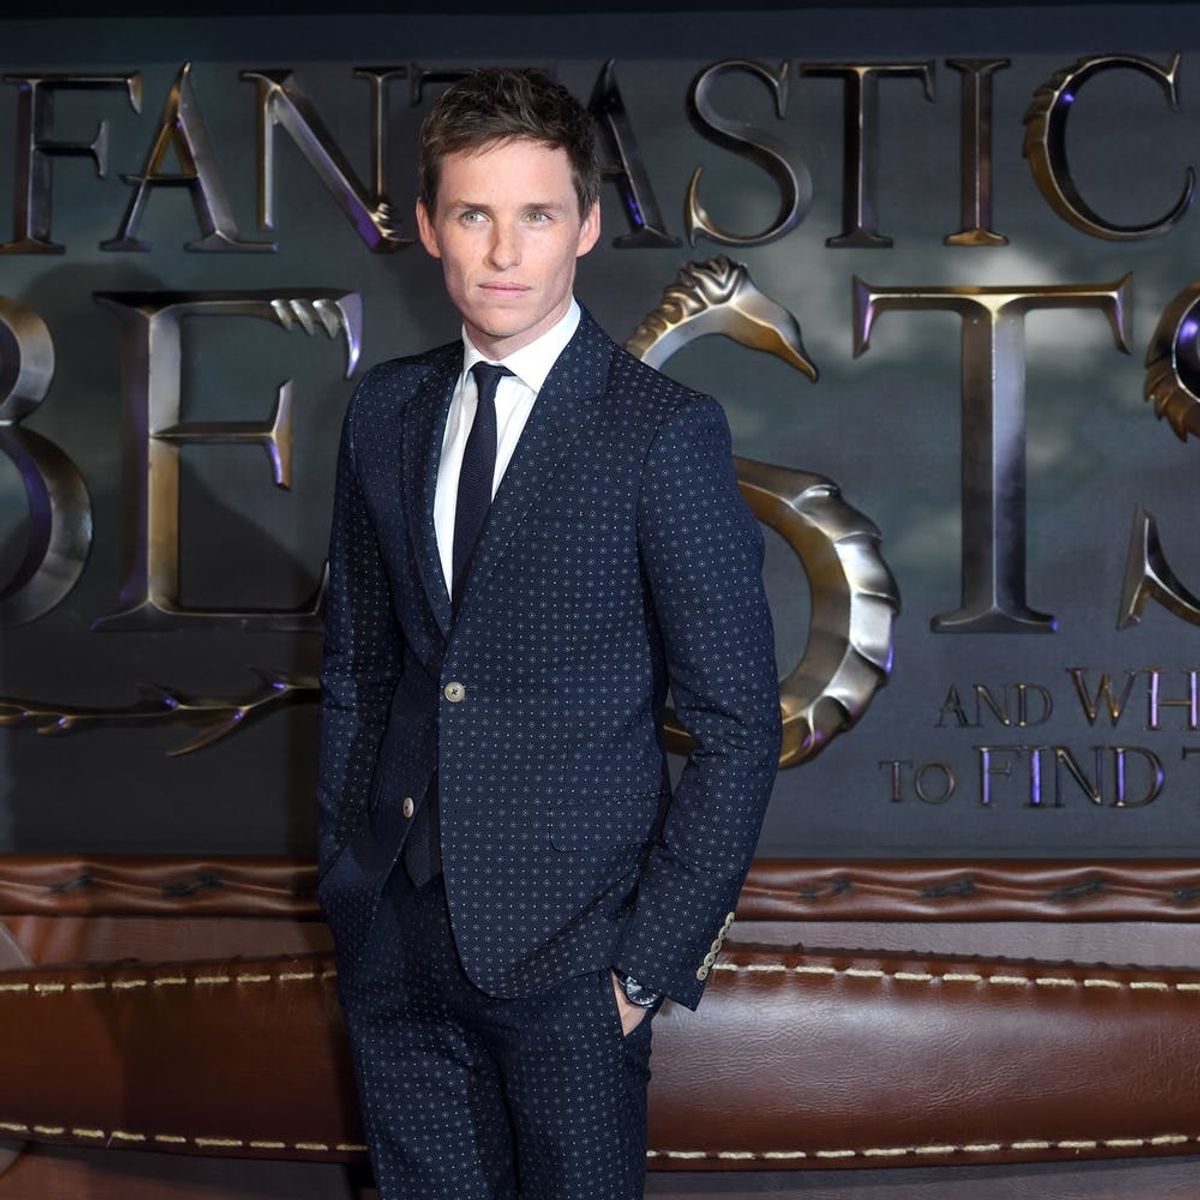 This “Fantastic Beasts 2” Sneak Peek Is Causing a Commotion on Twitter